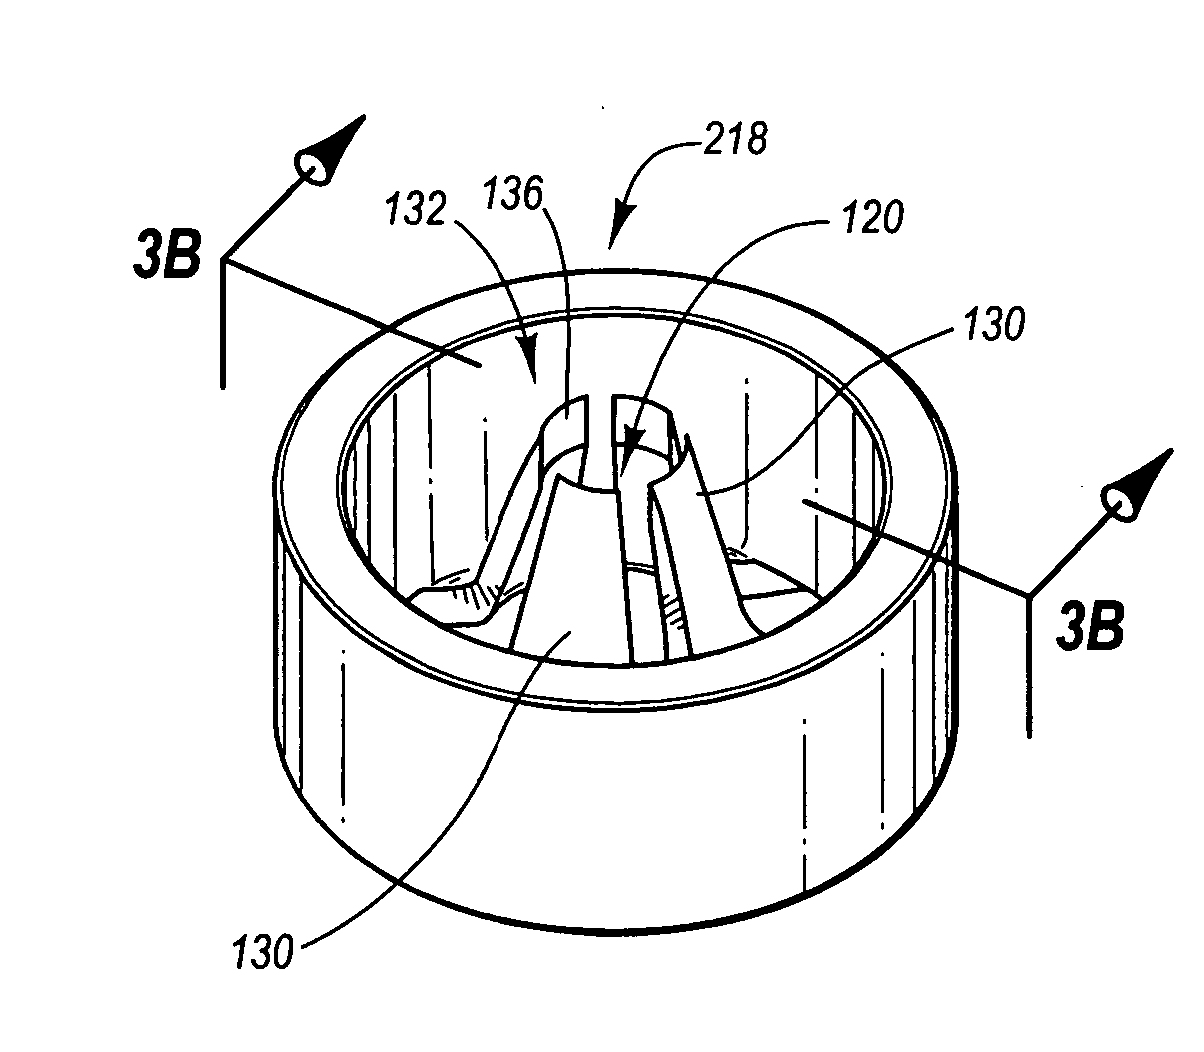 Vascular sealing device with locking system